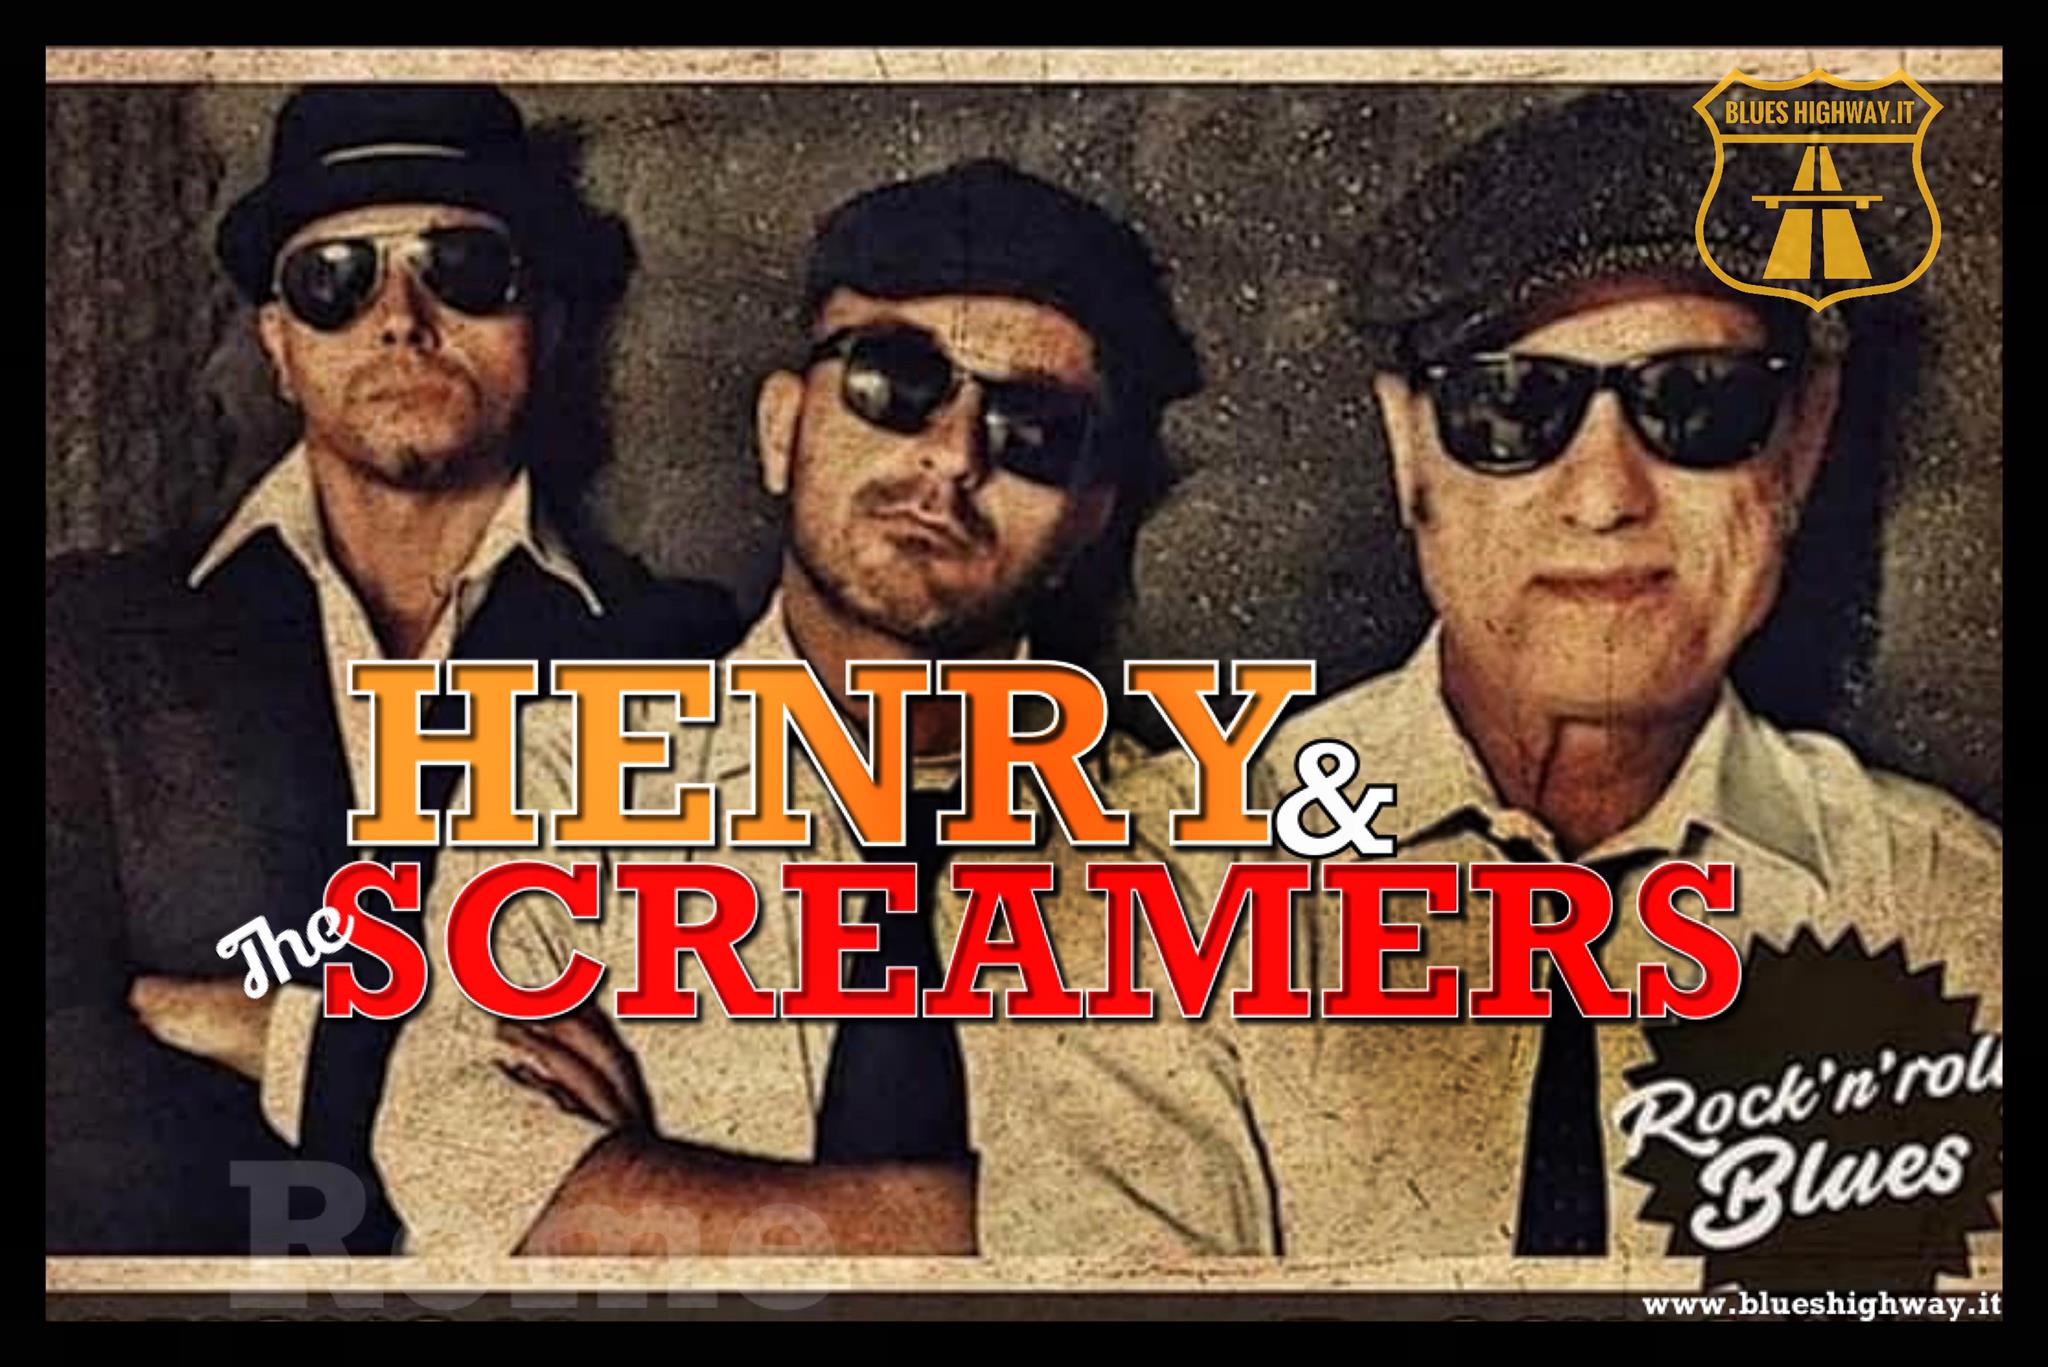 HENRY & THE SCREAMERS